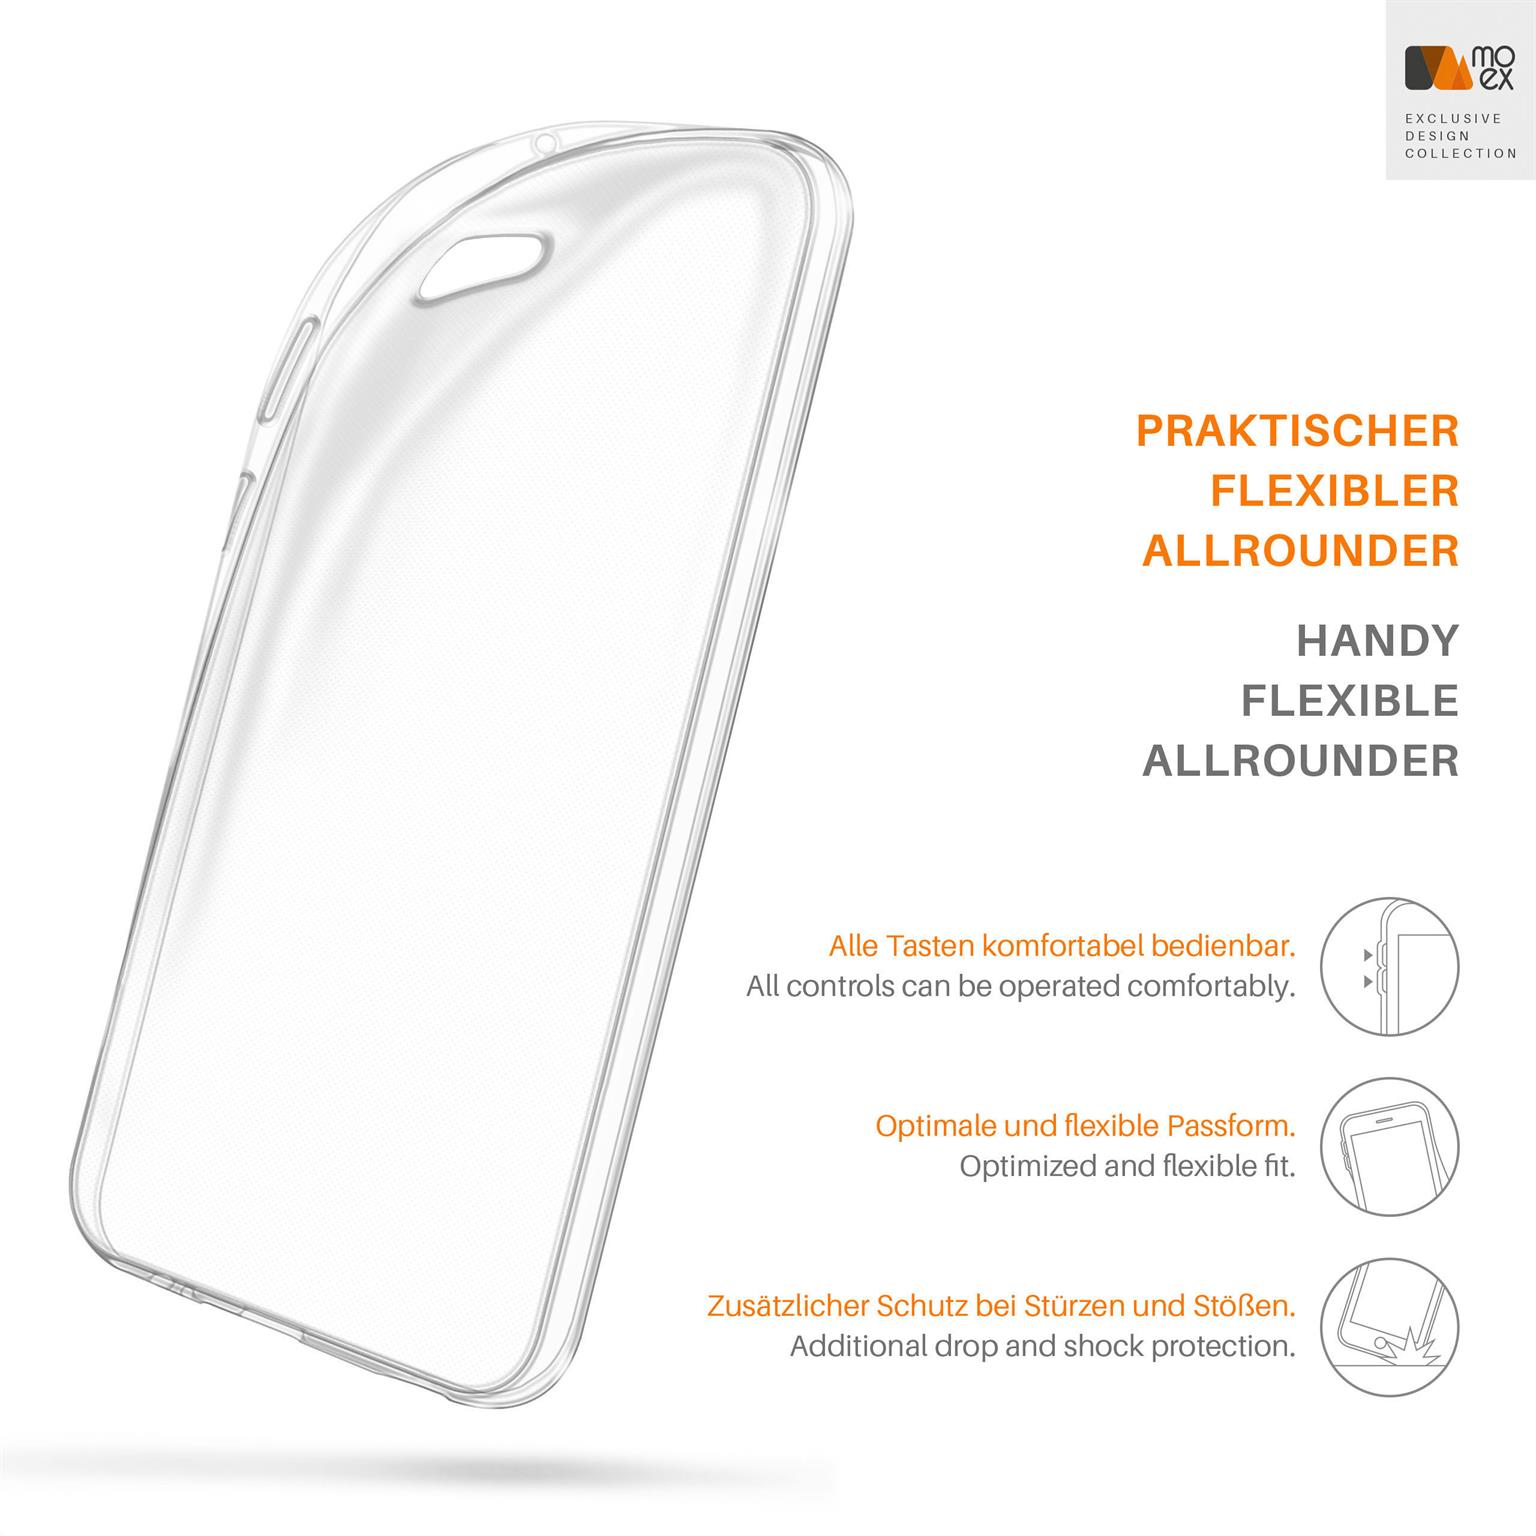 Case, Backcover, Crystal-Clear Desire Aero HTC, 12, MOEX